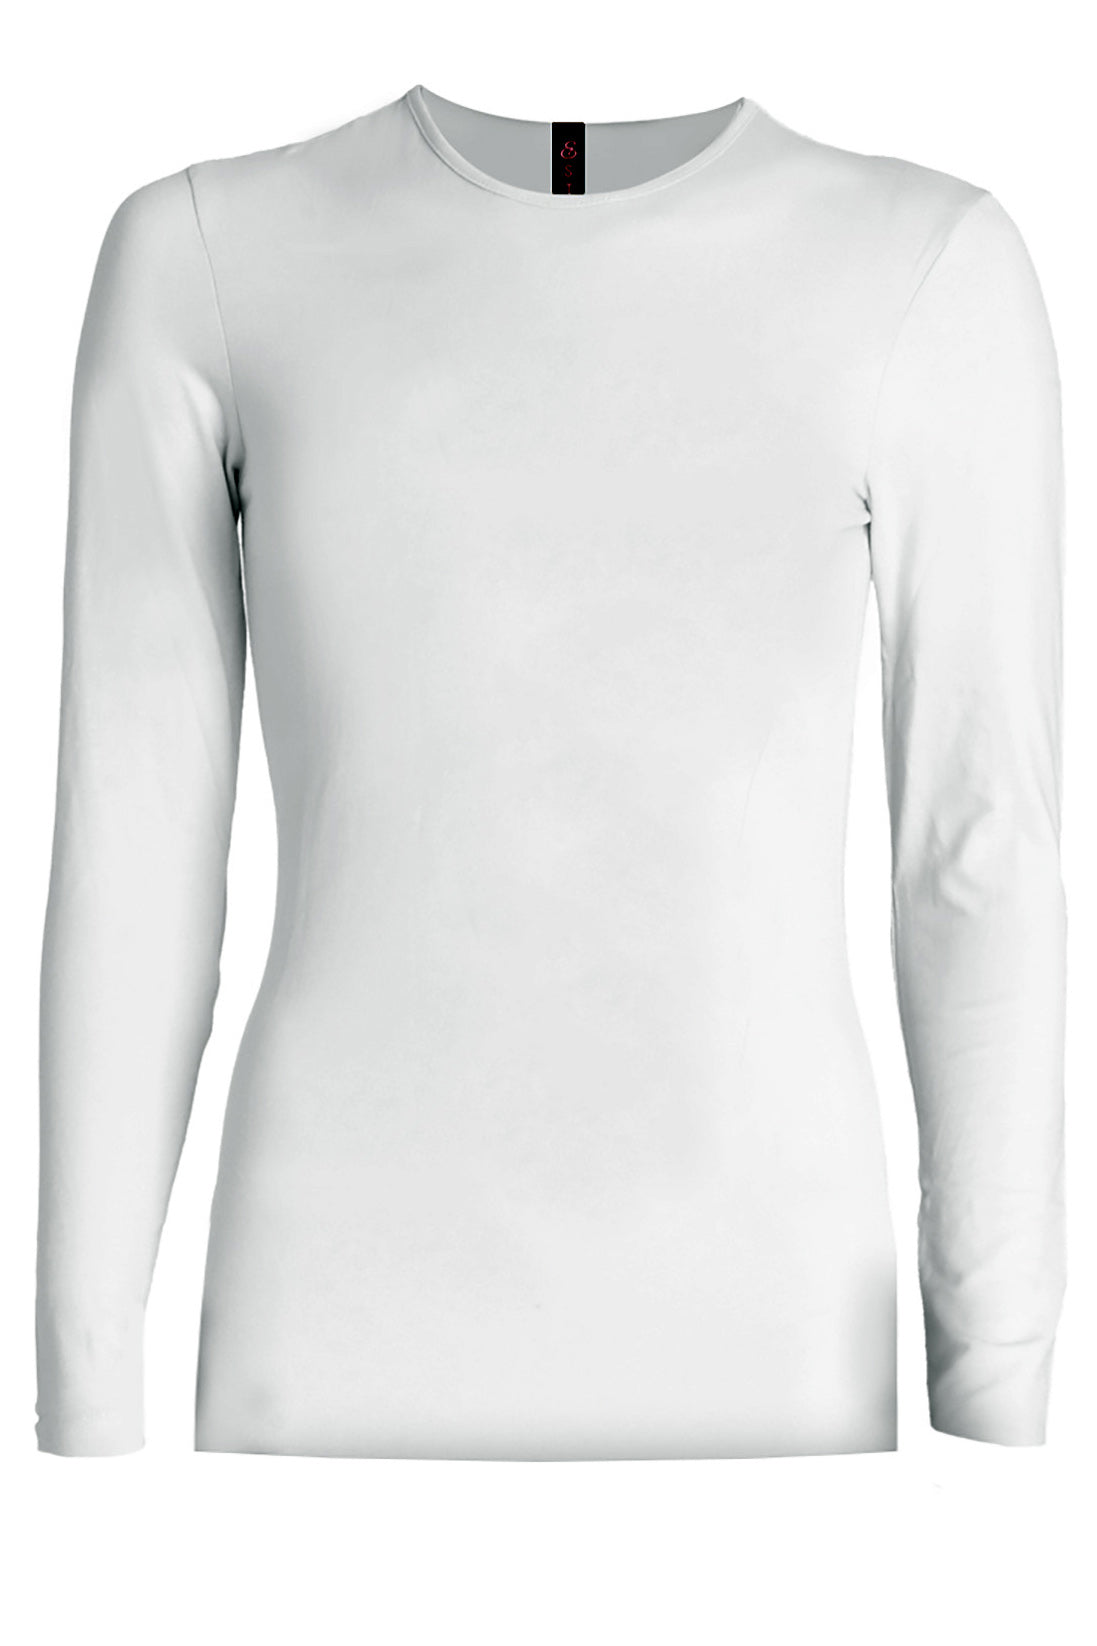 Esteez Long Sleeve - RELAXED FIT - Cotton Spandex Layering Shell / Top for GIRLS - WHITE